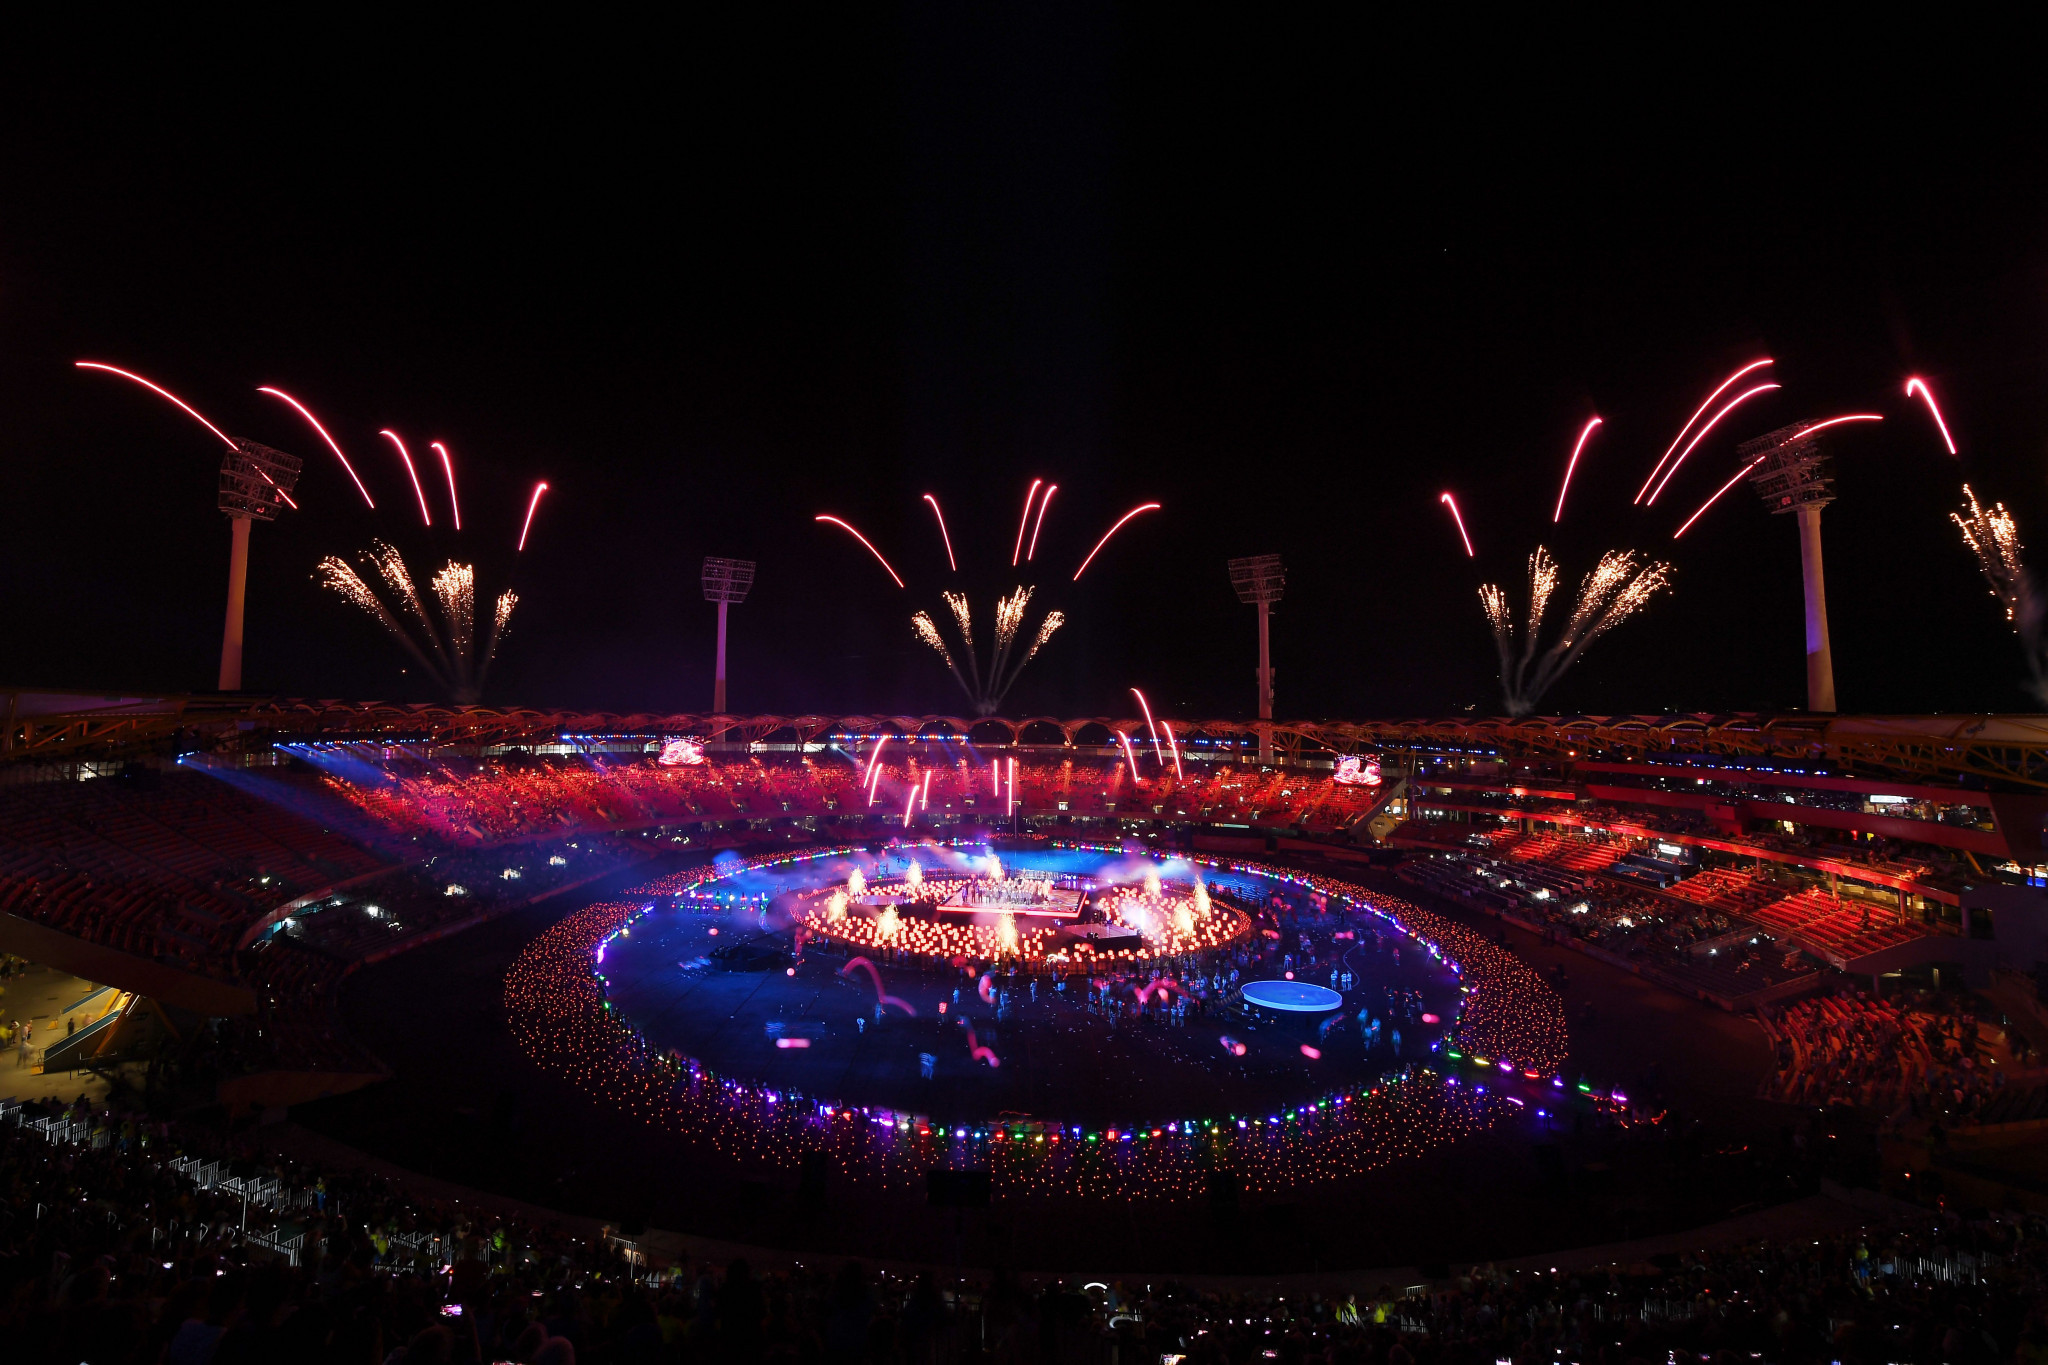 The Carrara Stadium hosted ceremonies at the Gold Coast 2018 Commonwealth Games ©Getty Images